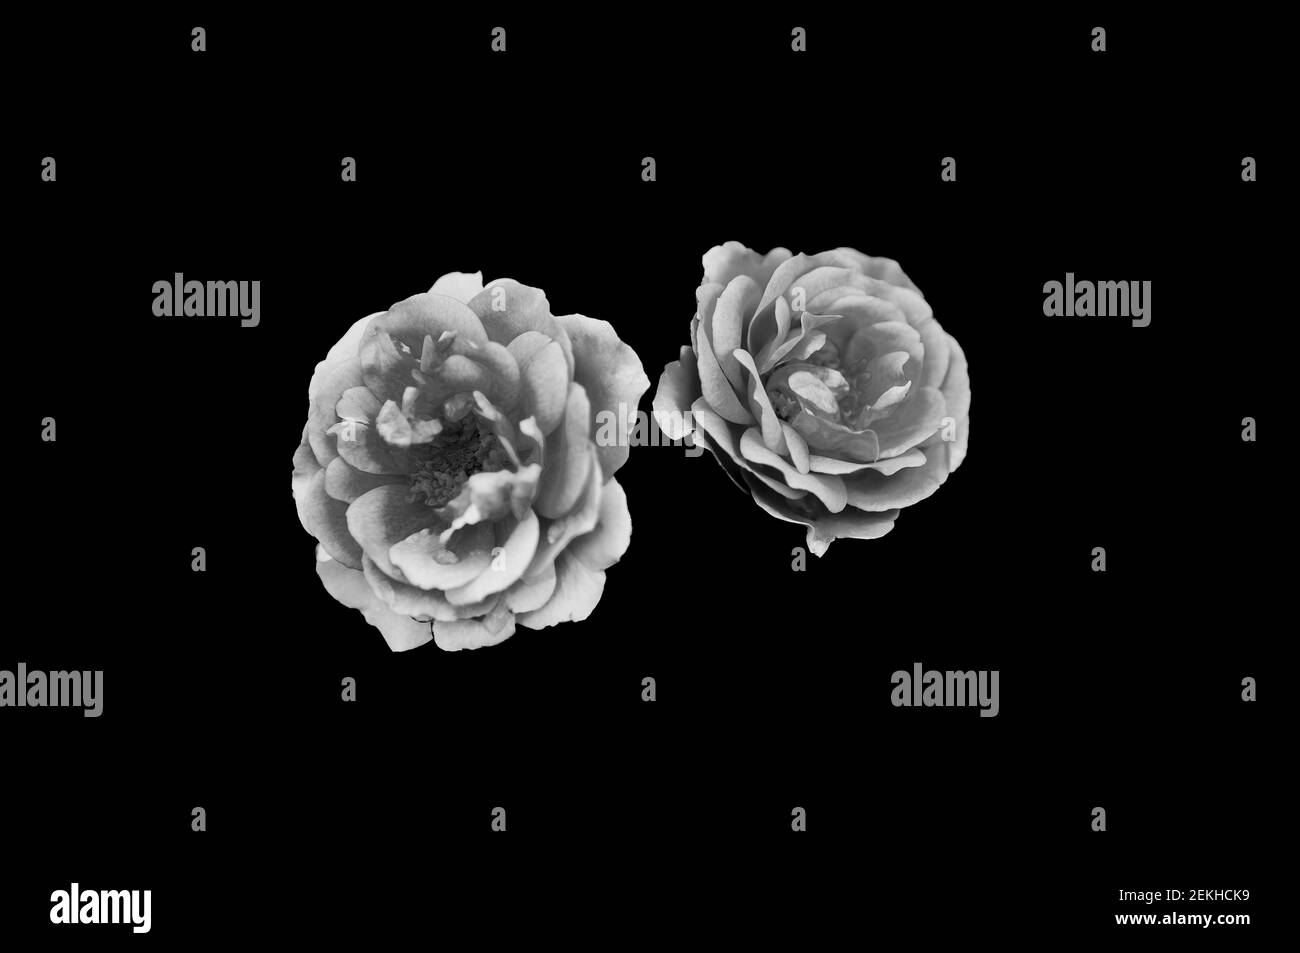 Rose flower heads in black and white Stock Photo